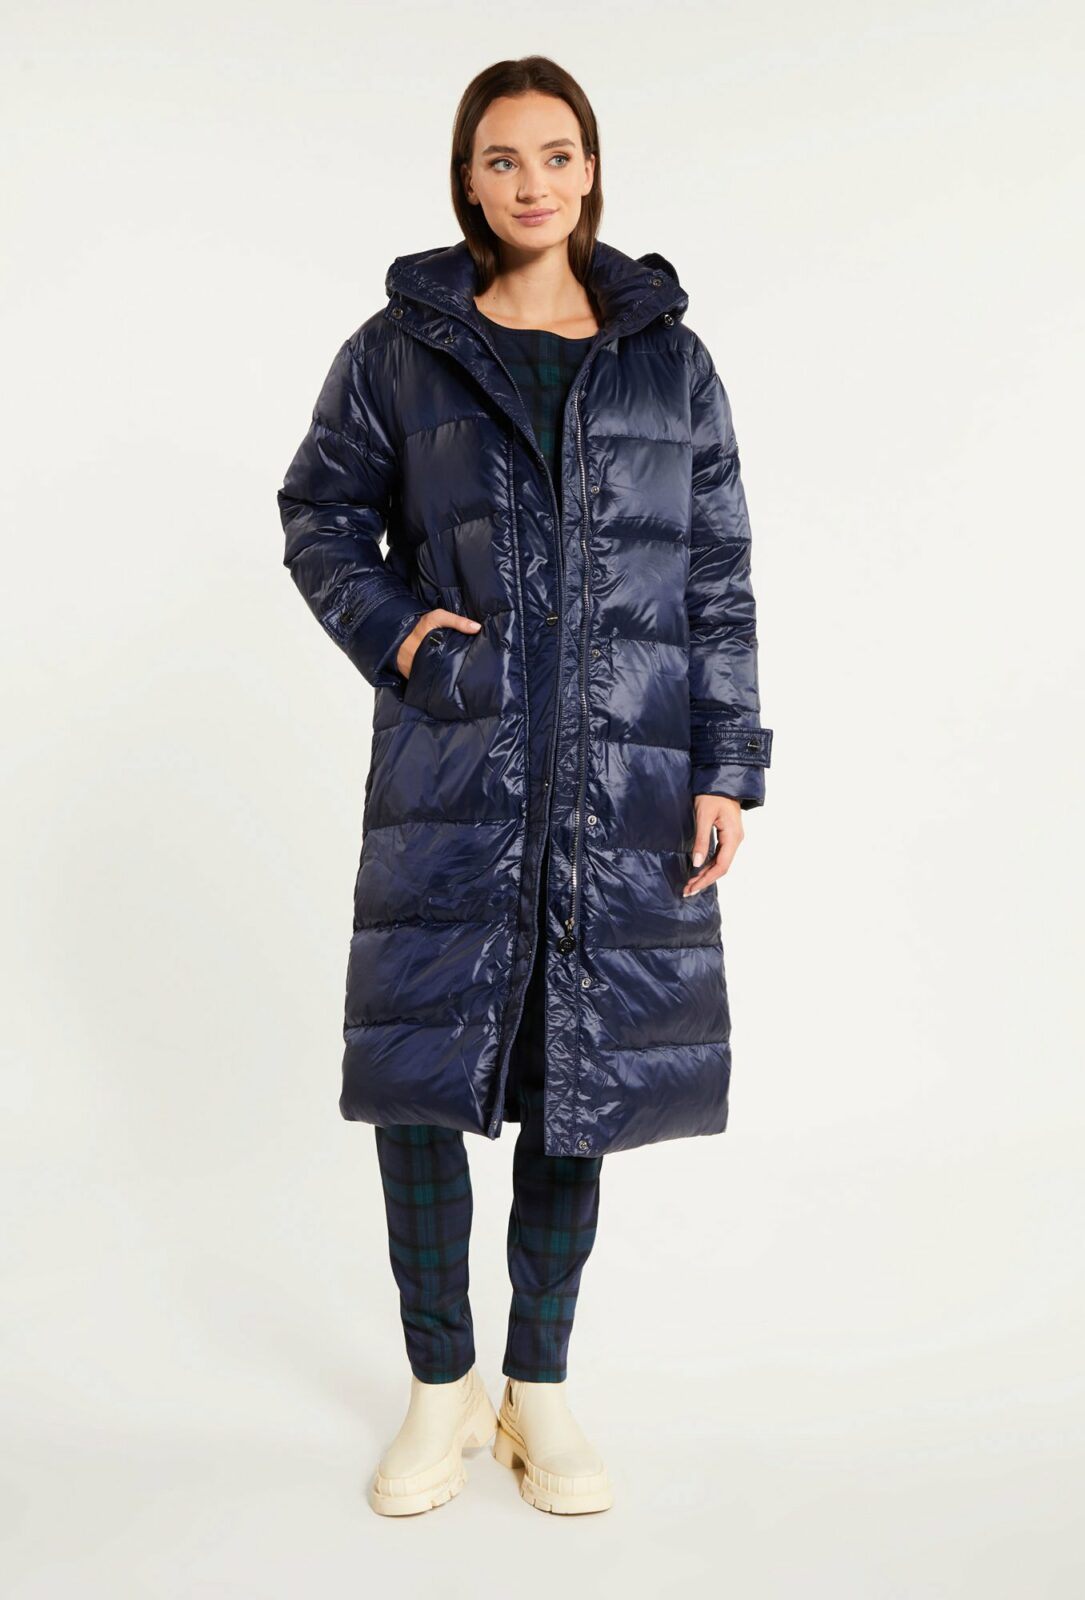 MONNARI Woman's Coats Quilted Women's